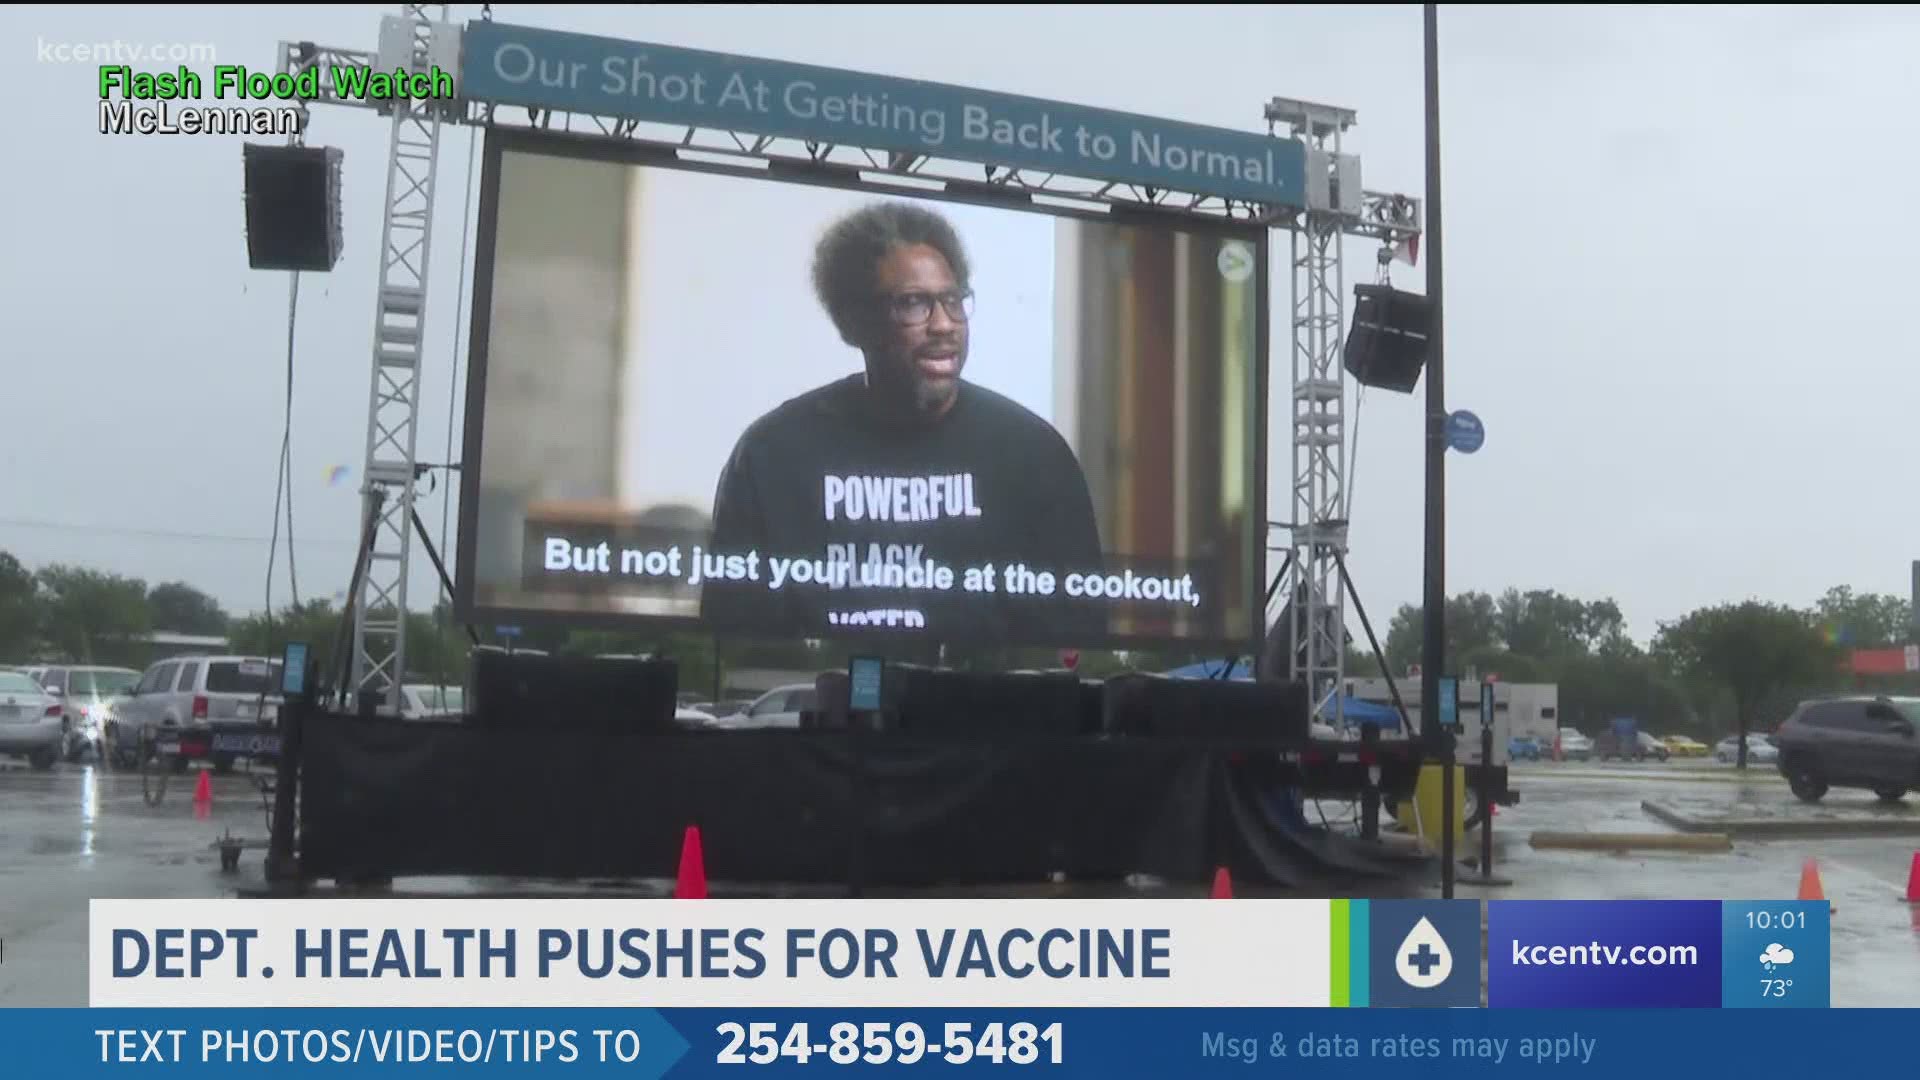 There was a pop-up event in Bellmead on Sunday to educate community members about the vaccine that included walk-in vaccinations.